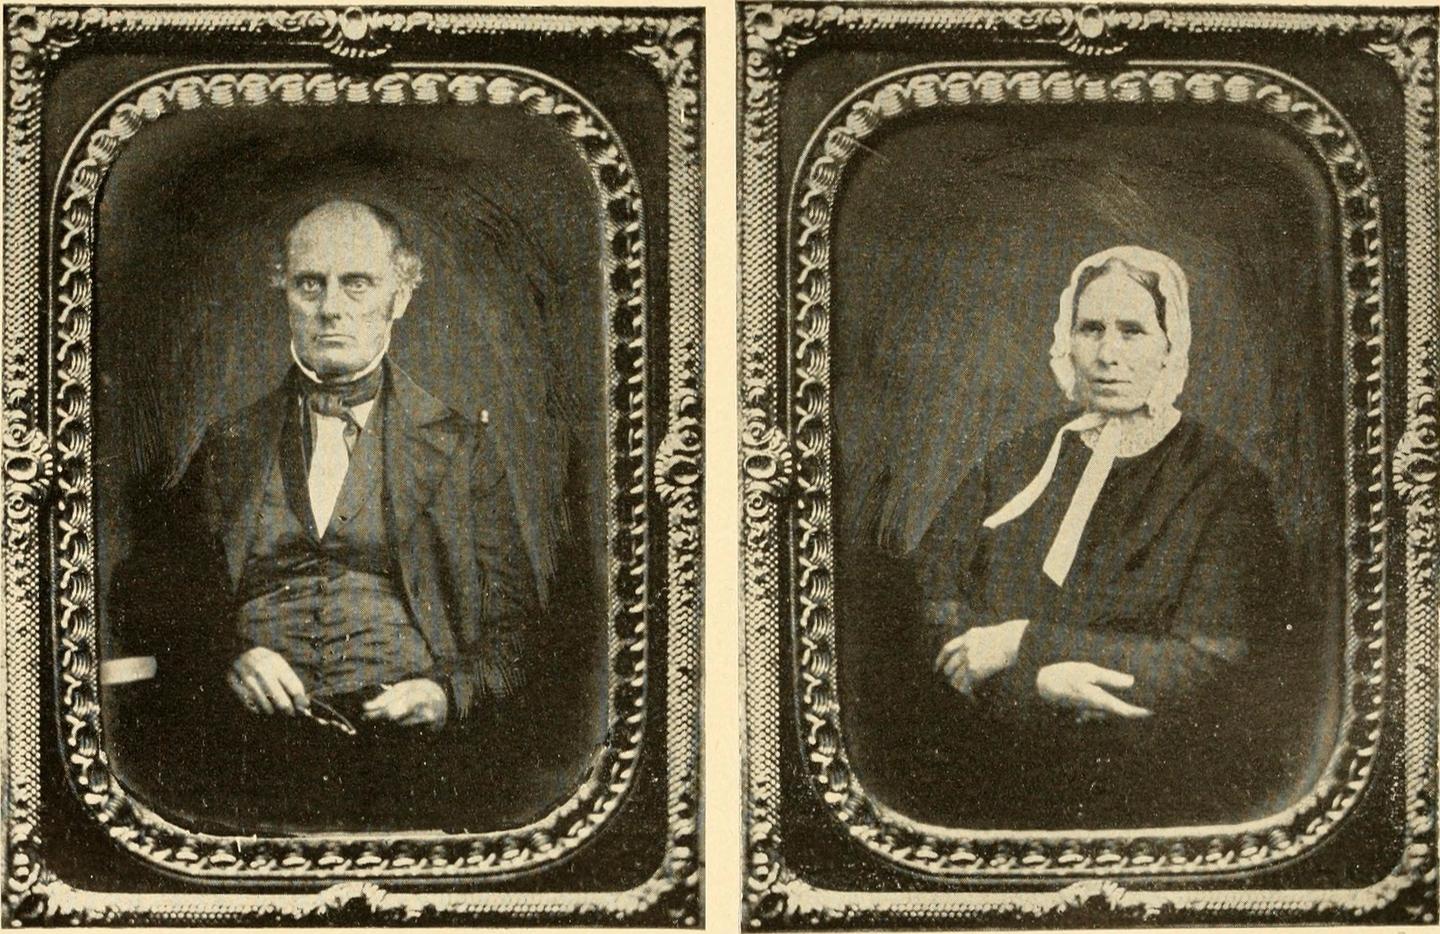 These people are Susan B. Anthony's mother and father, two major ...